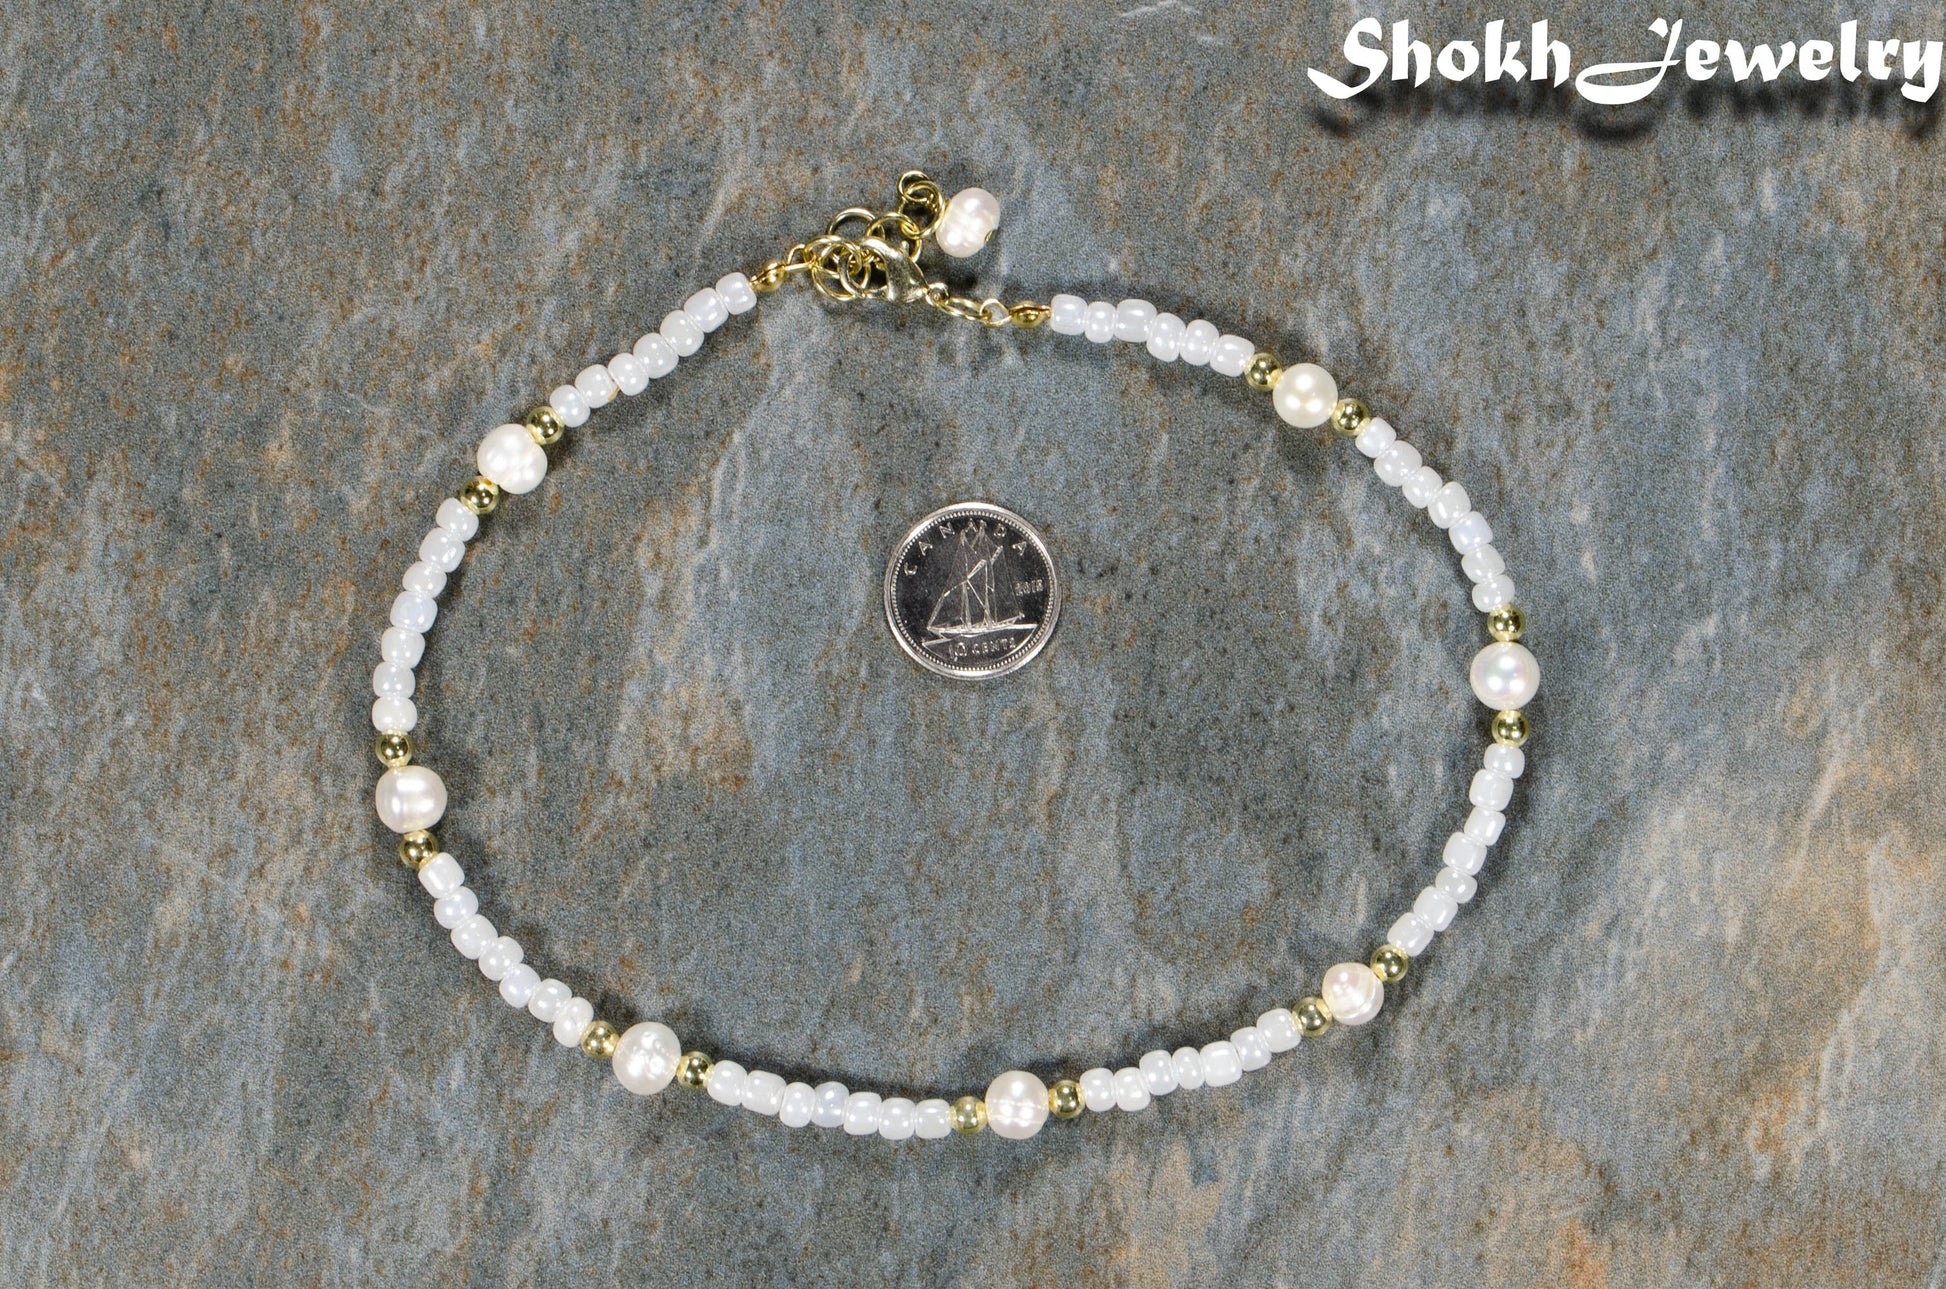 Freshwater Pearl and Seed Bead Anklet beside a dime